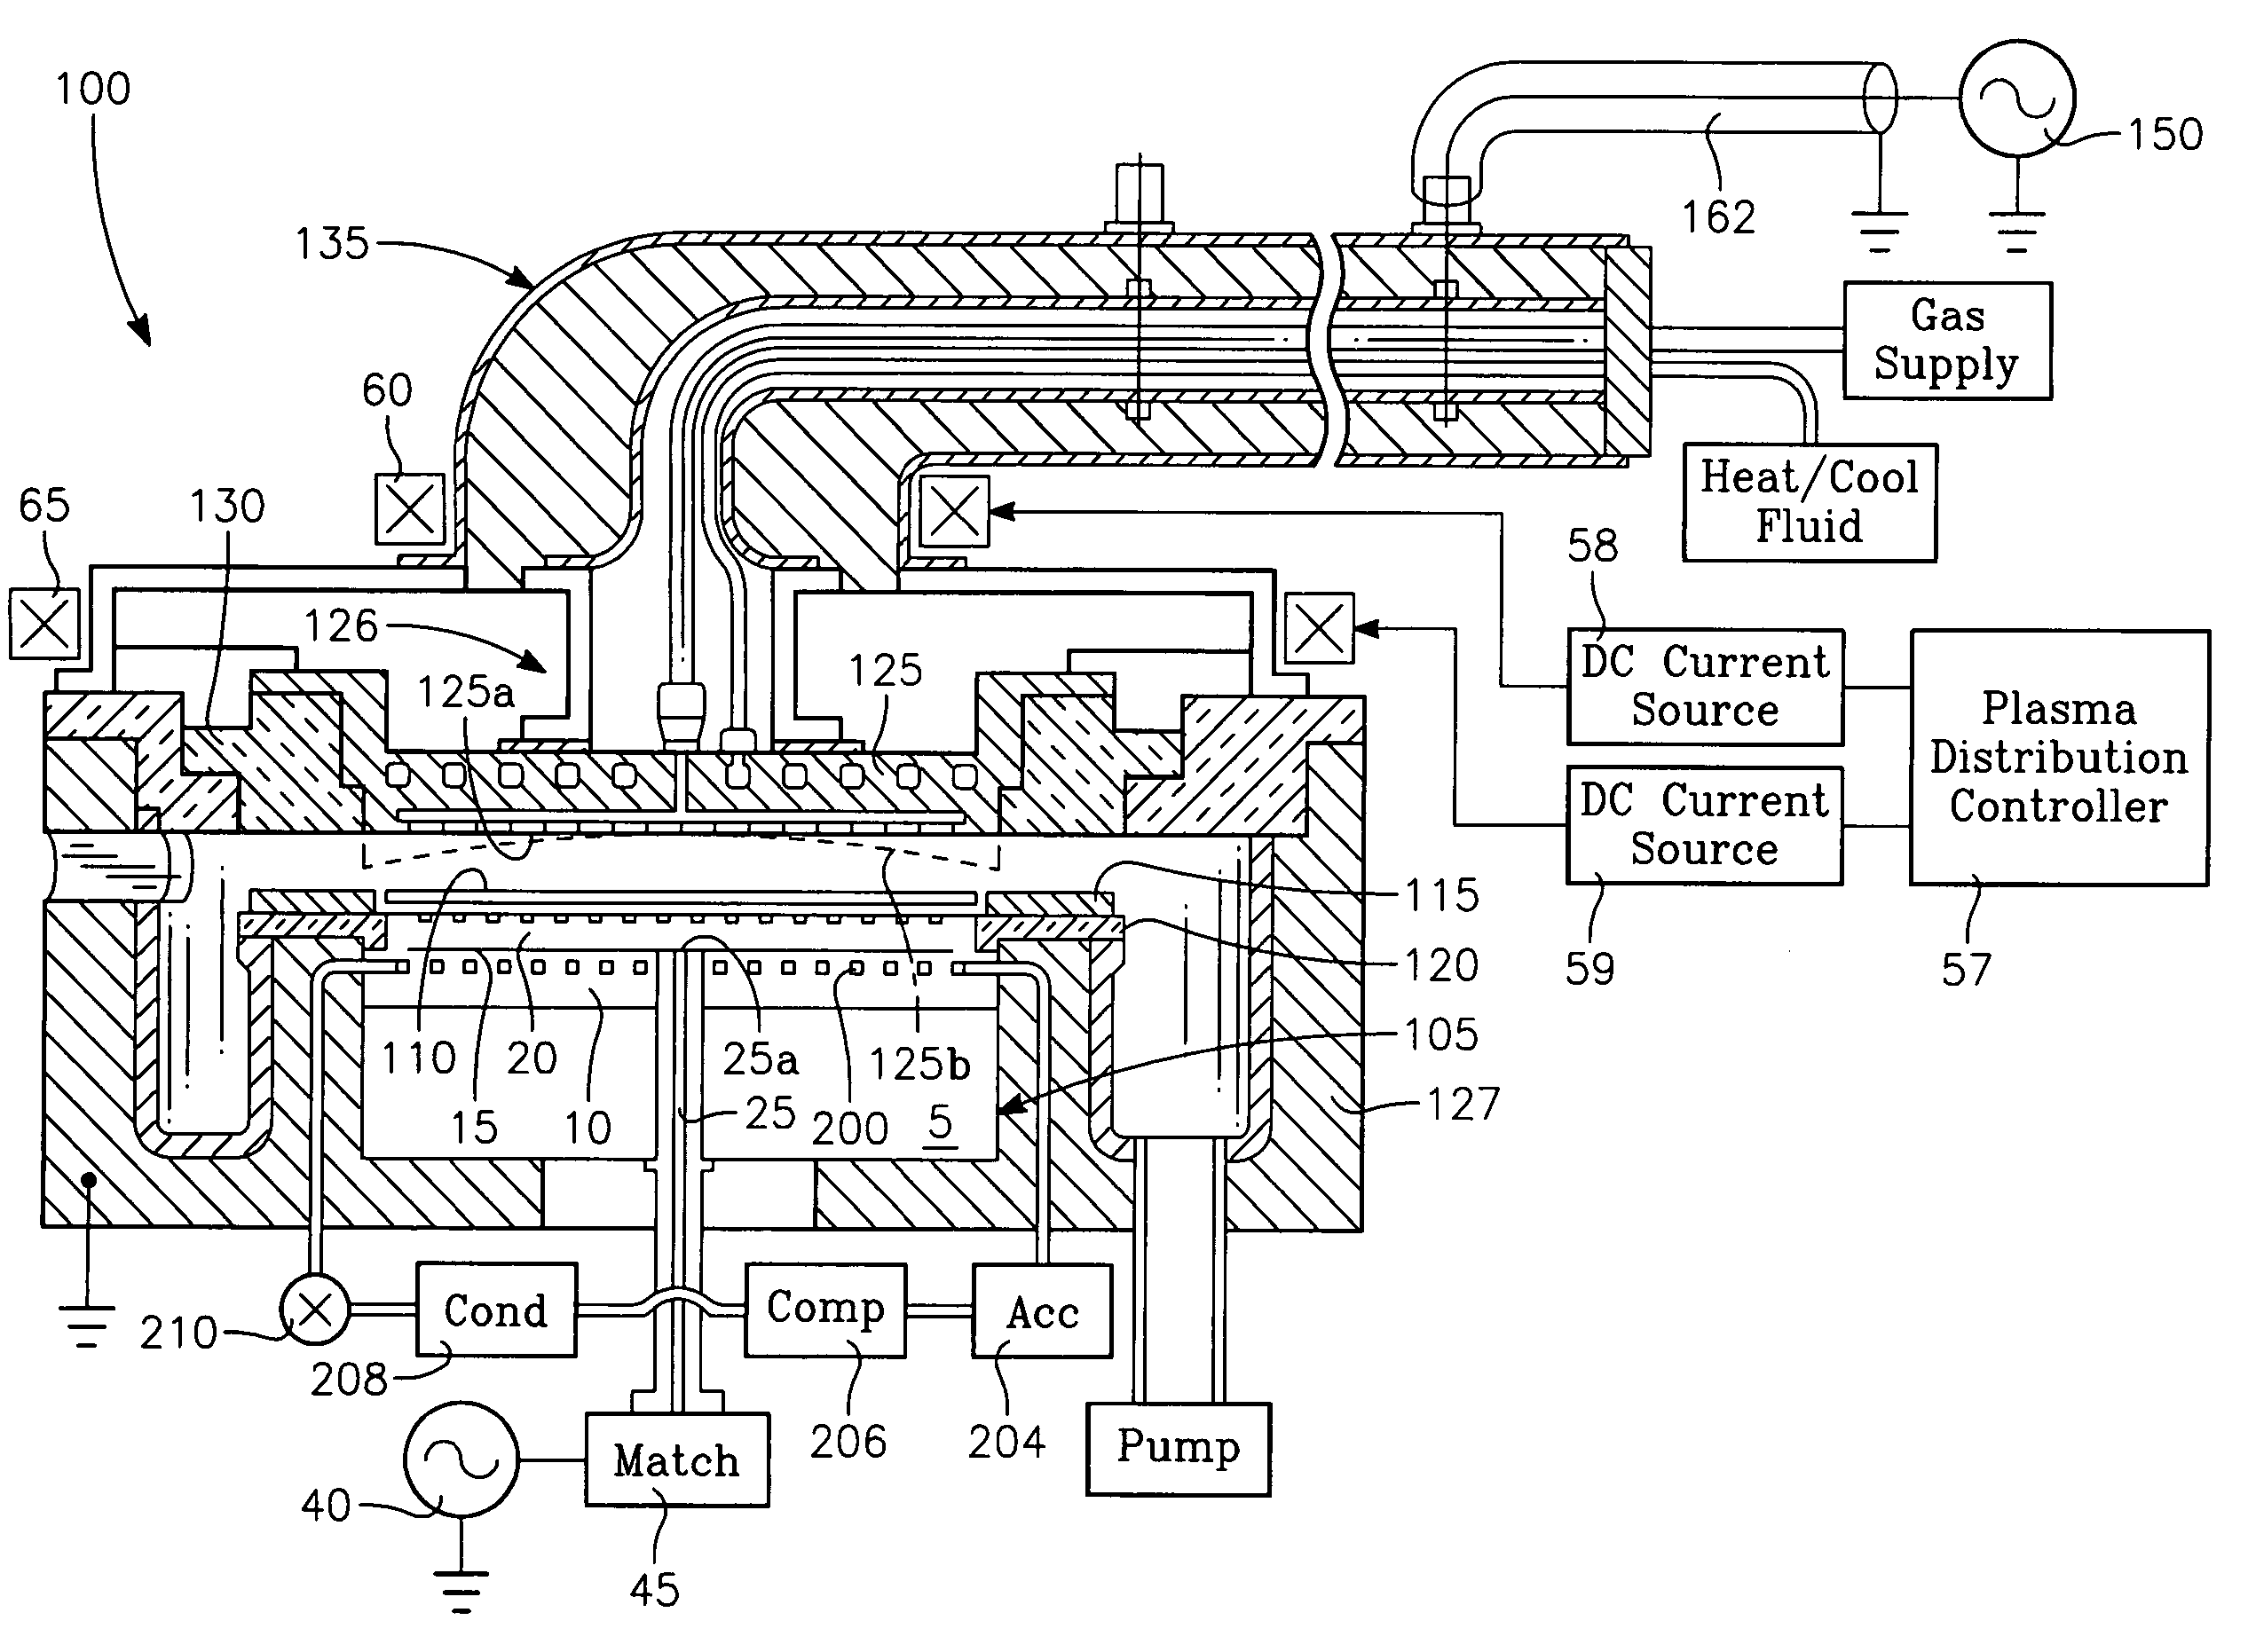 Method for agile workpiece temperature control in a plasma reactor using a thermal model